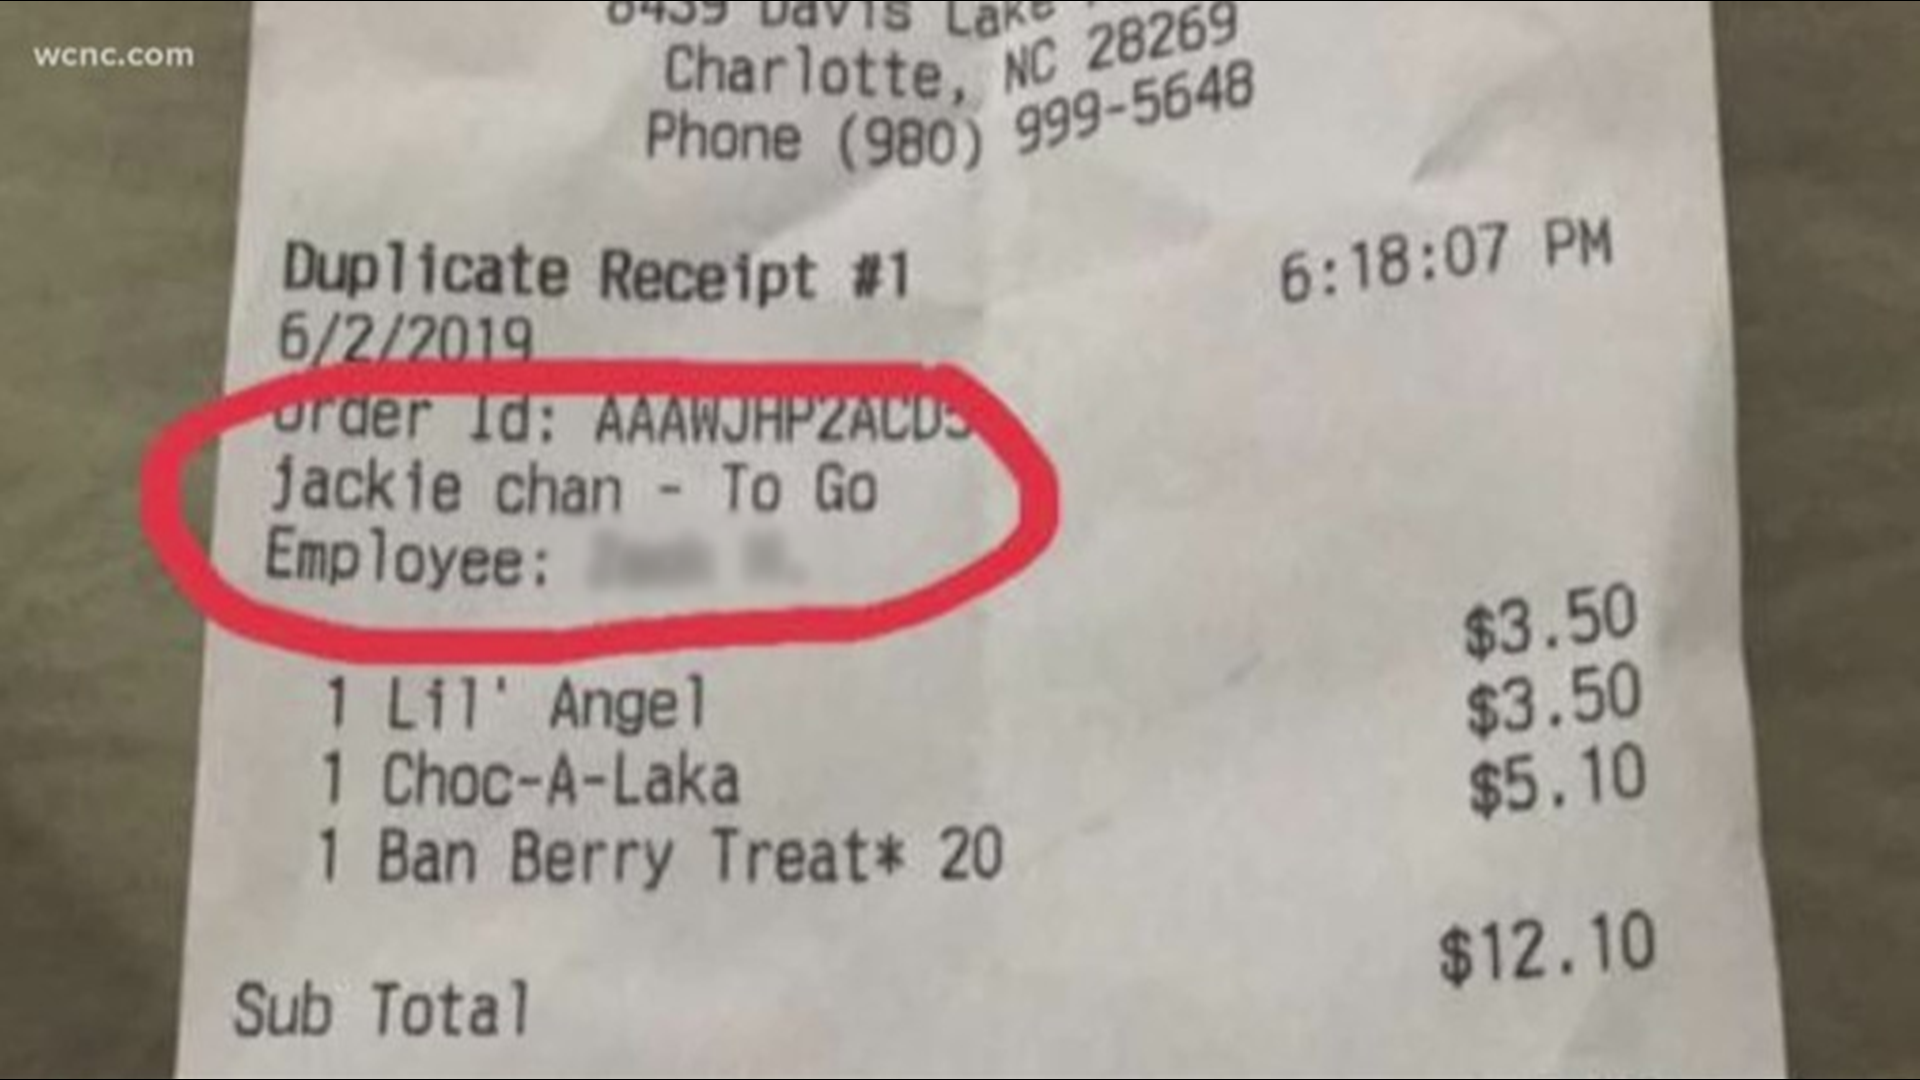 Two Charlotte Smoothie Kings have been shut down after customers noticed racist names added on their receipts. In one case, the n-word, and on another, the name "Jackie Chan."